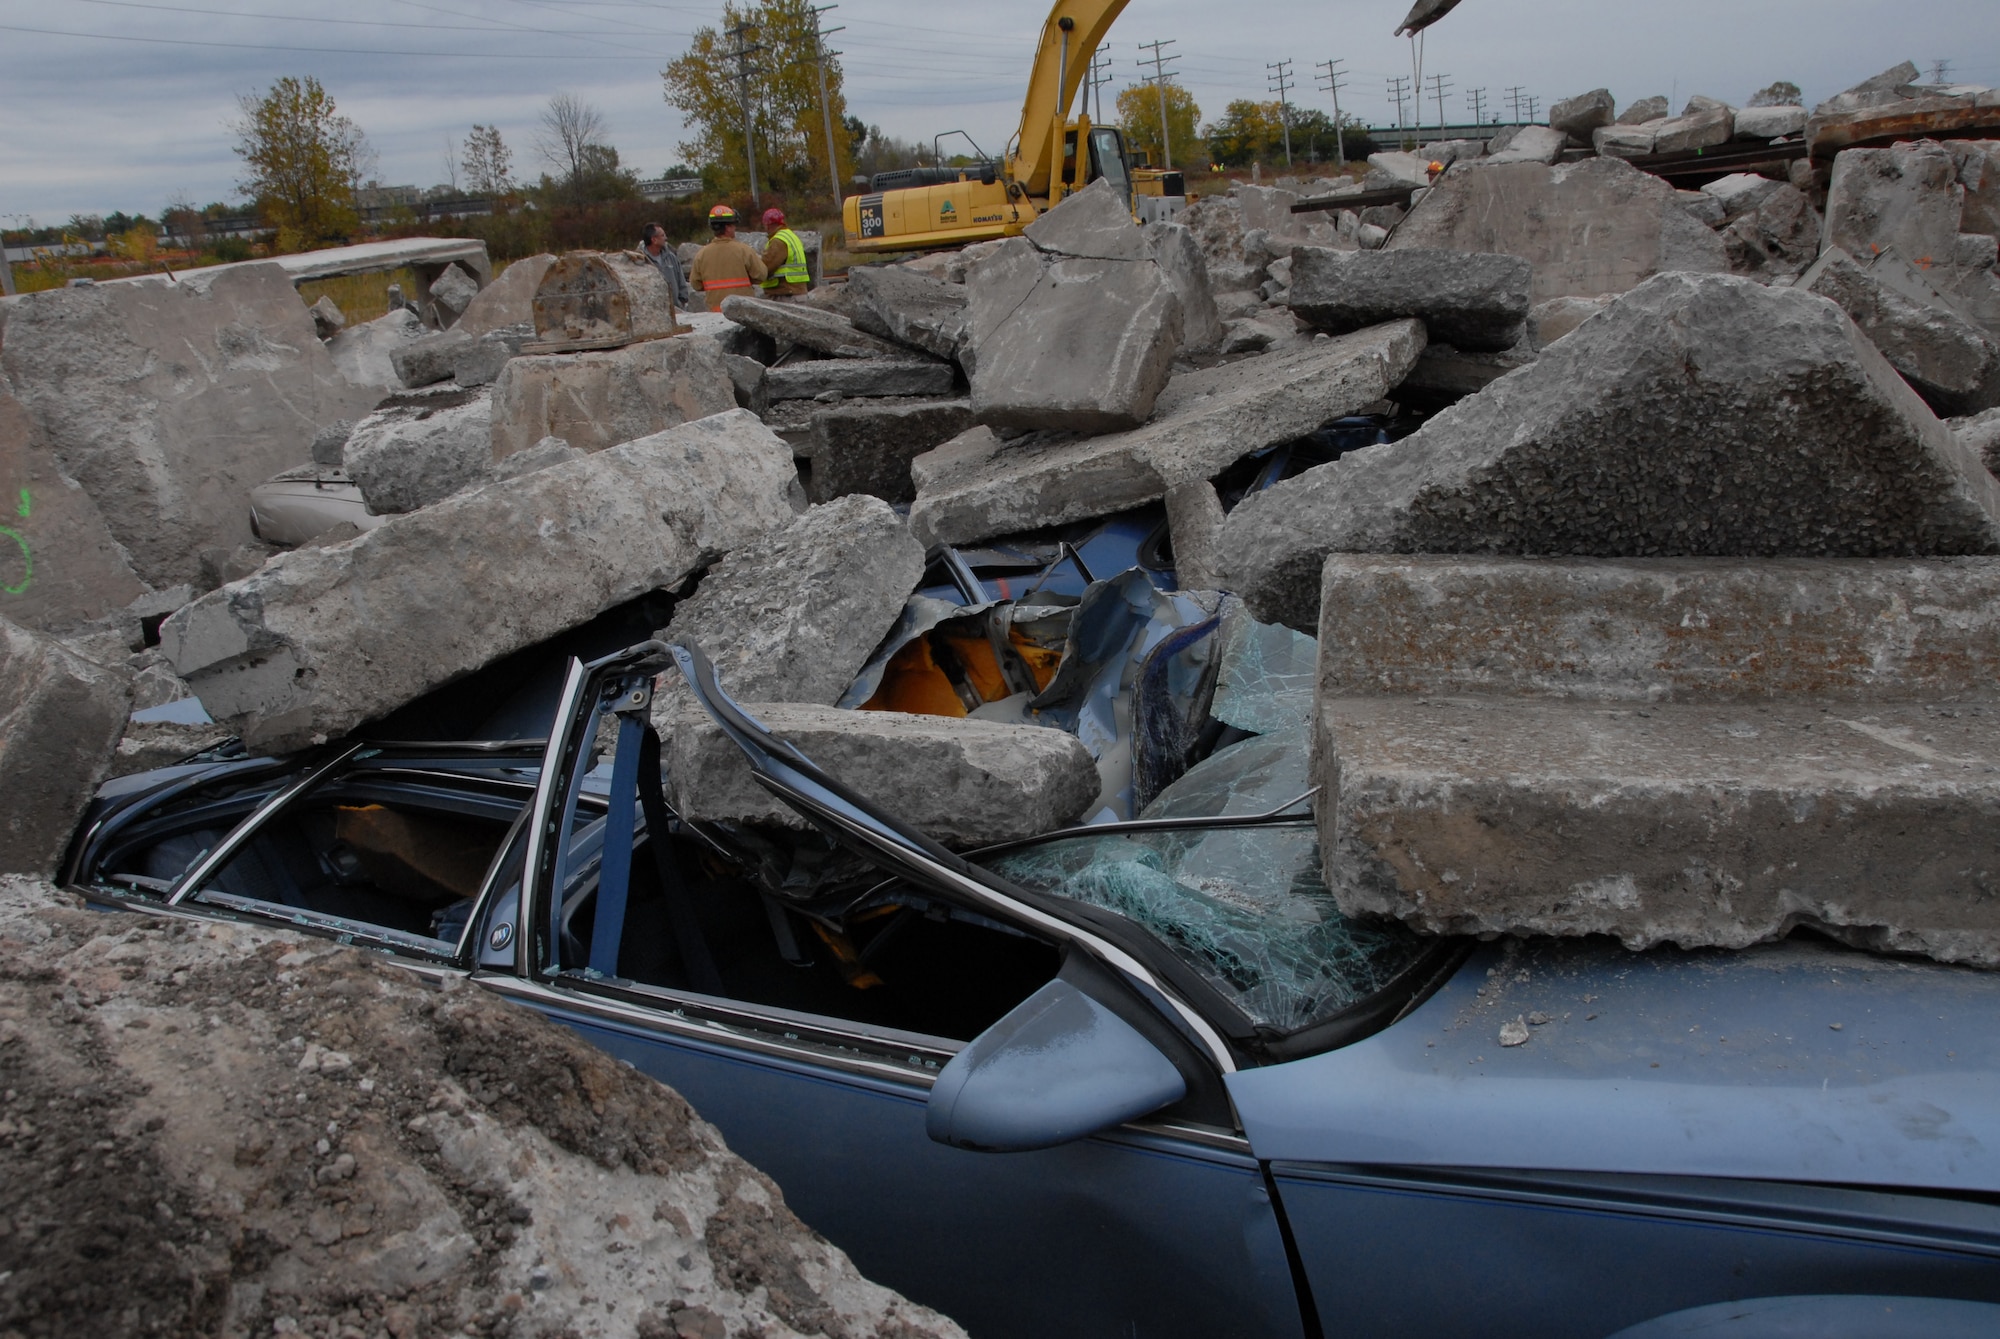 In the Town of Tonawanda, construction crews have been systematically placing a combination of rubble, vehicles and mannequins to create a variety of training scenarios. This realistic site with talking mannequins is designed to provide rescuers the ability to perform both search and rescue, and search and recovery exercises. It will also provide the platform for medical personnel to evaluate and evacuate the casualties. (U.S. Air Force photo/SMSgt. Ray Lloyd